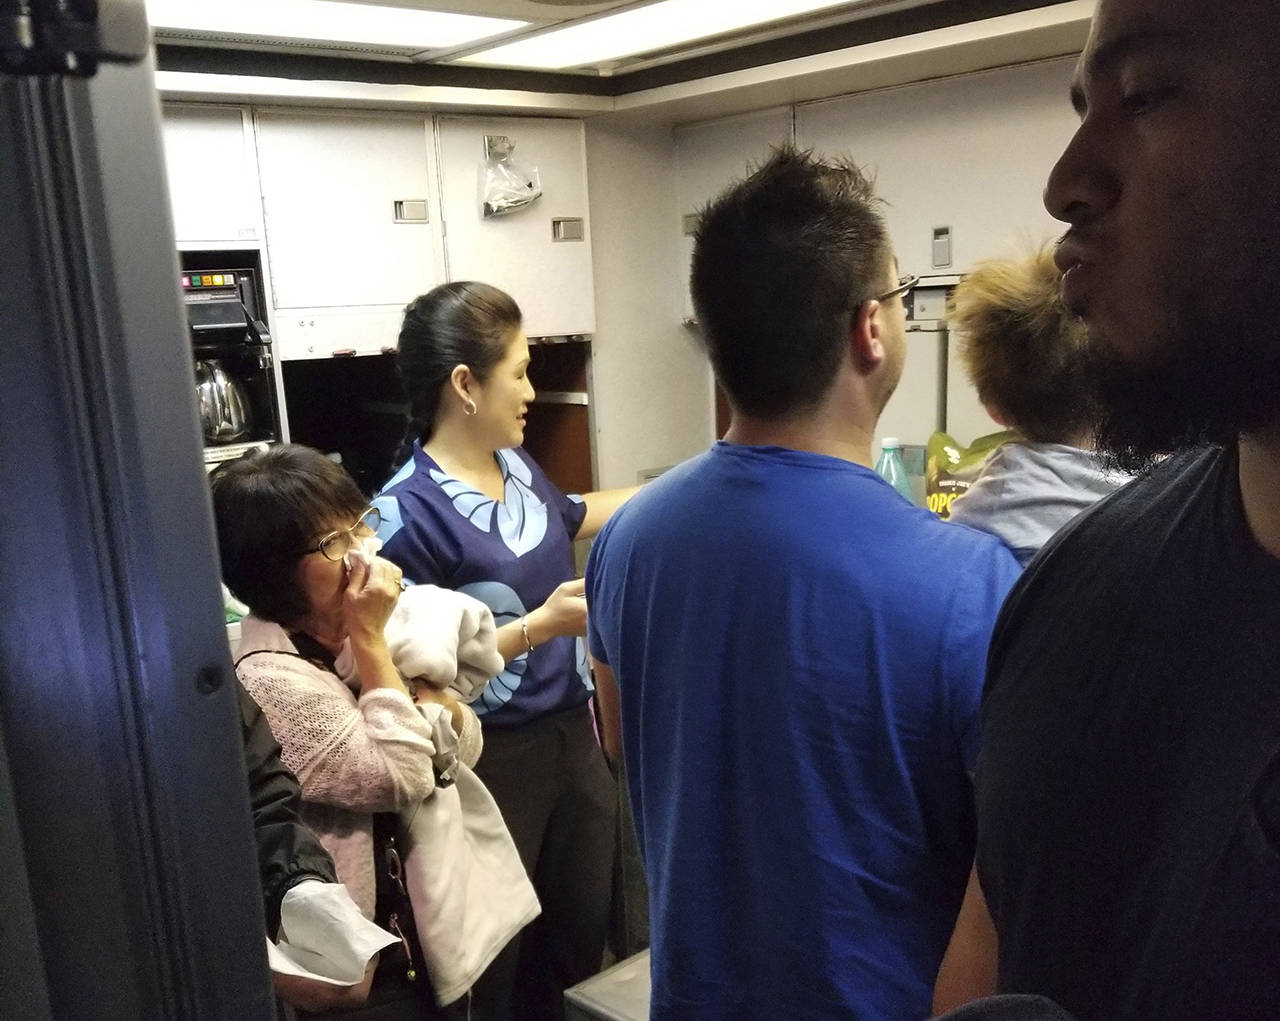 This Aug. 31 photo shows people gathered in a back galley on a Hawaiian Airlines flight from Oakland, California, to Kahului, Hawaii, after a can of pepper spray went off inside the plane. (Nicholas Andrade via AP)